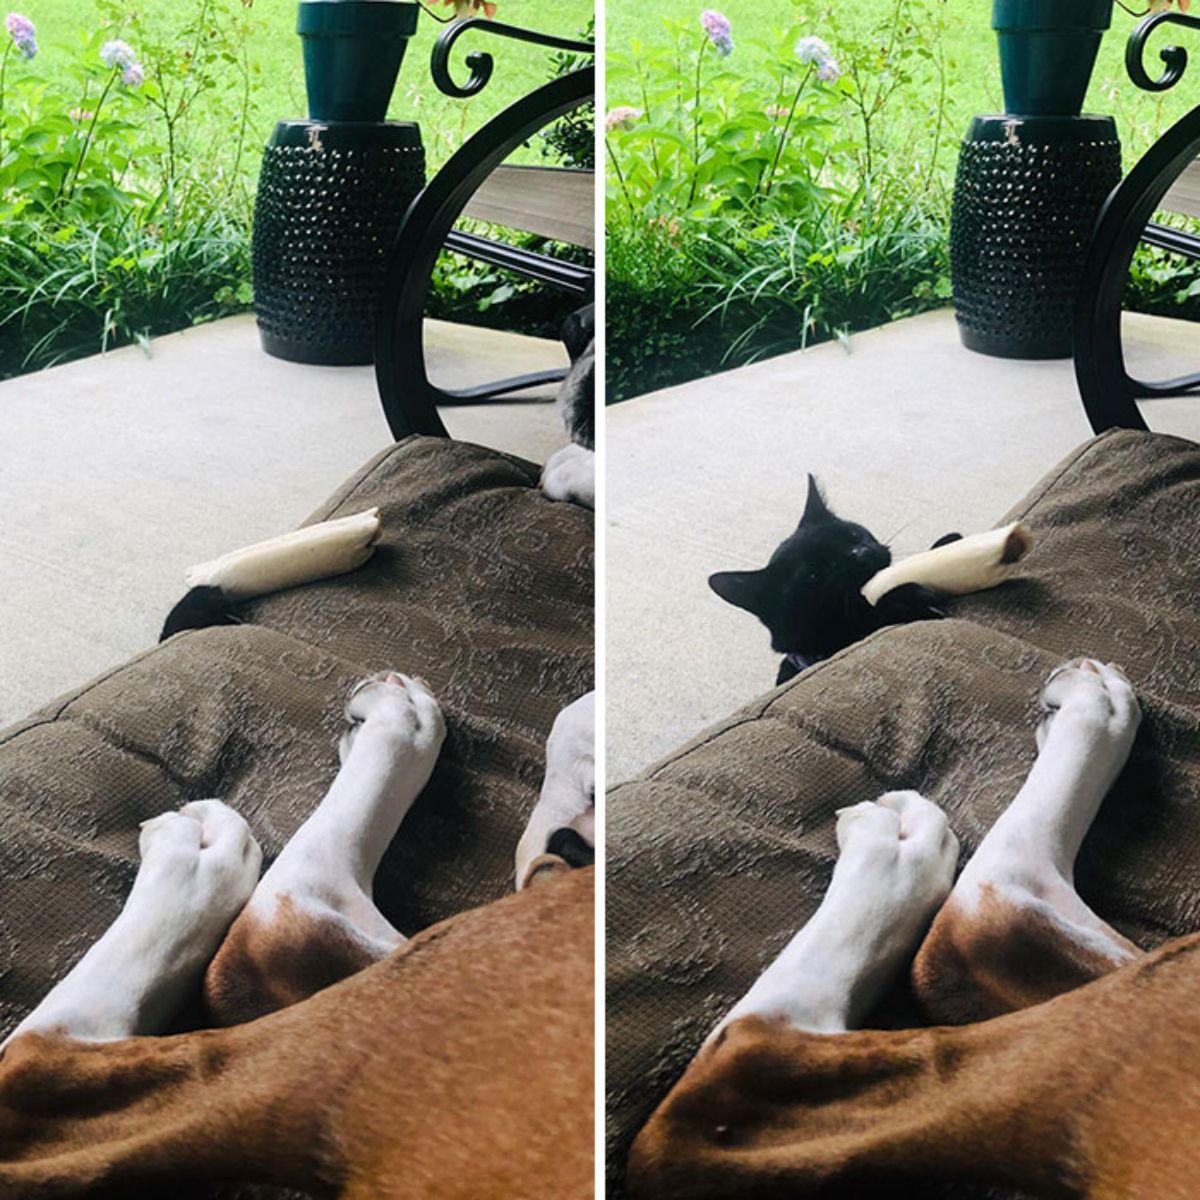 2 photos of a black cat stealing a brown and white dog's bone off of its black dog bed